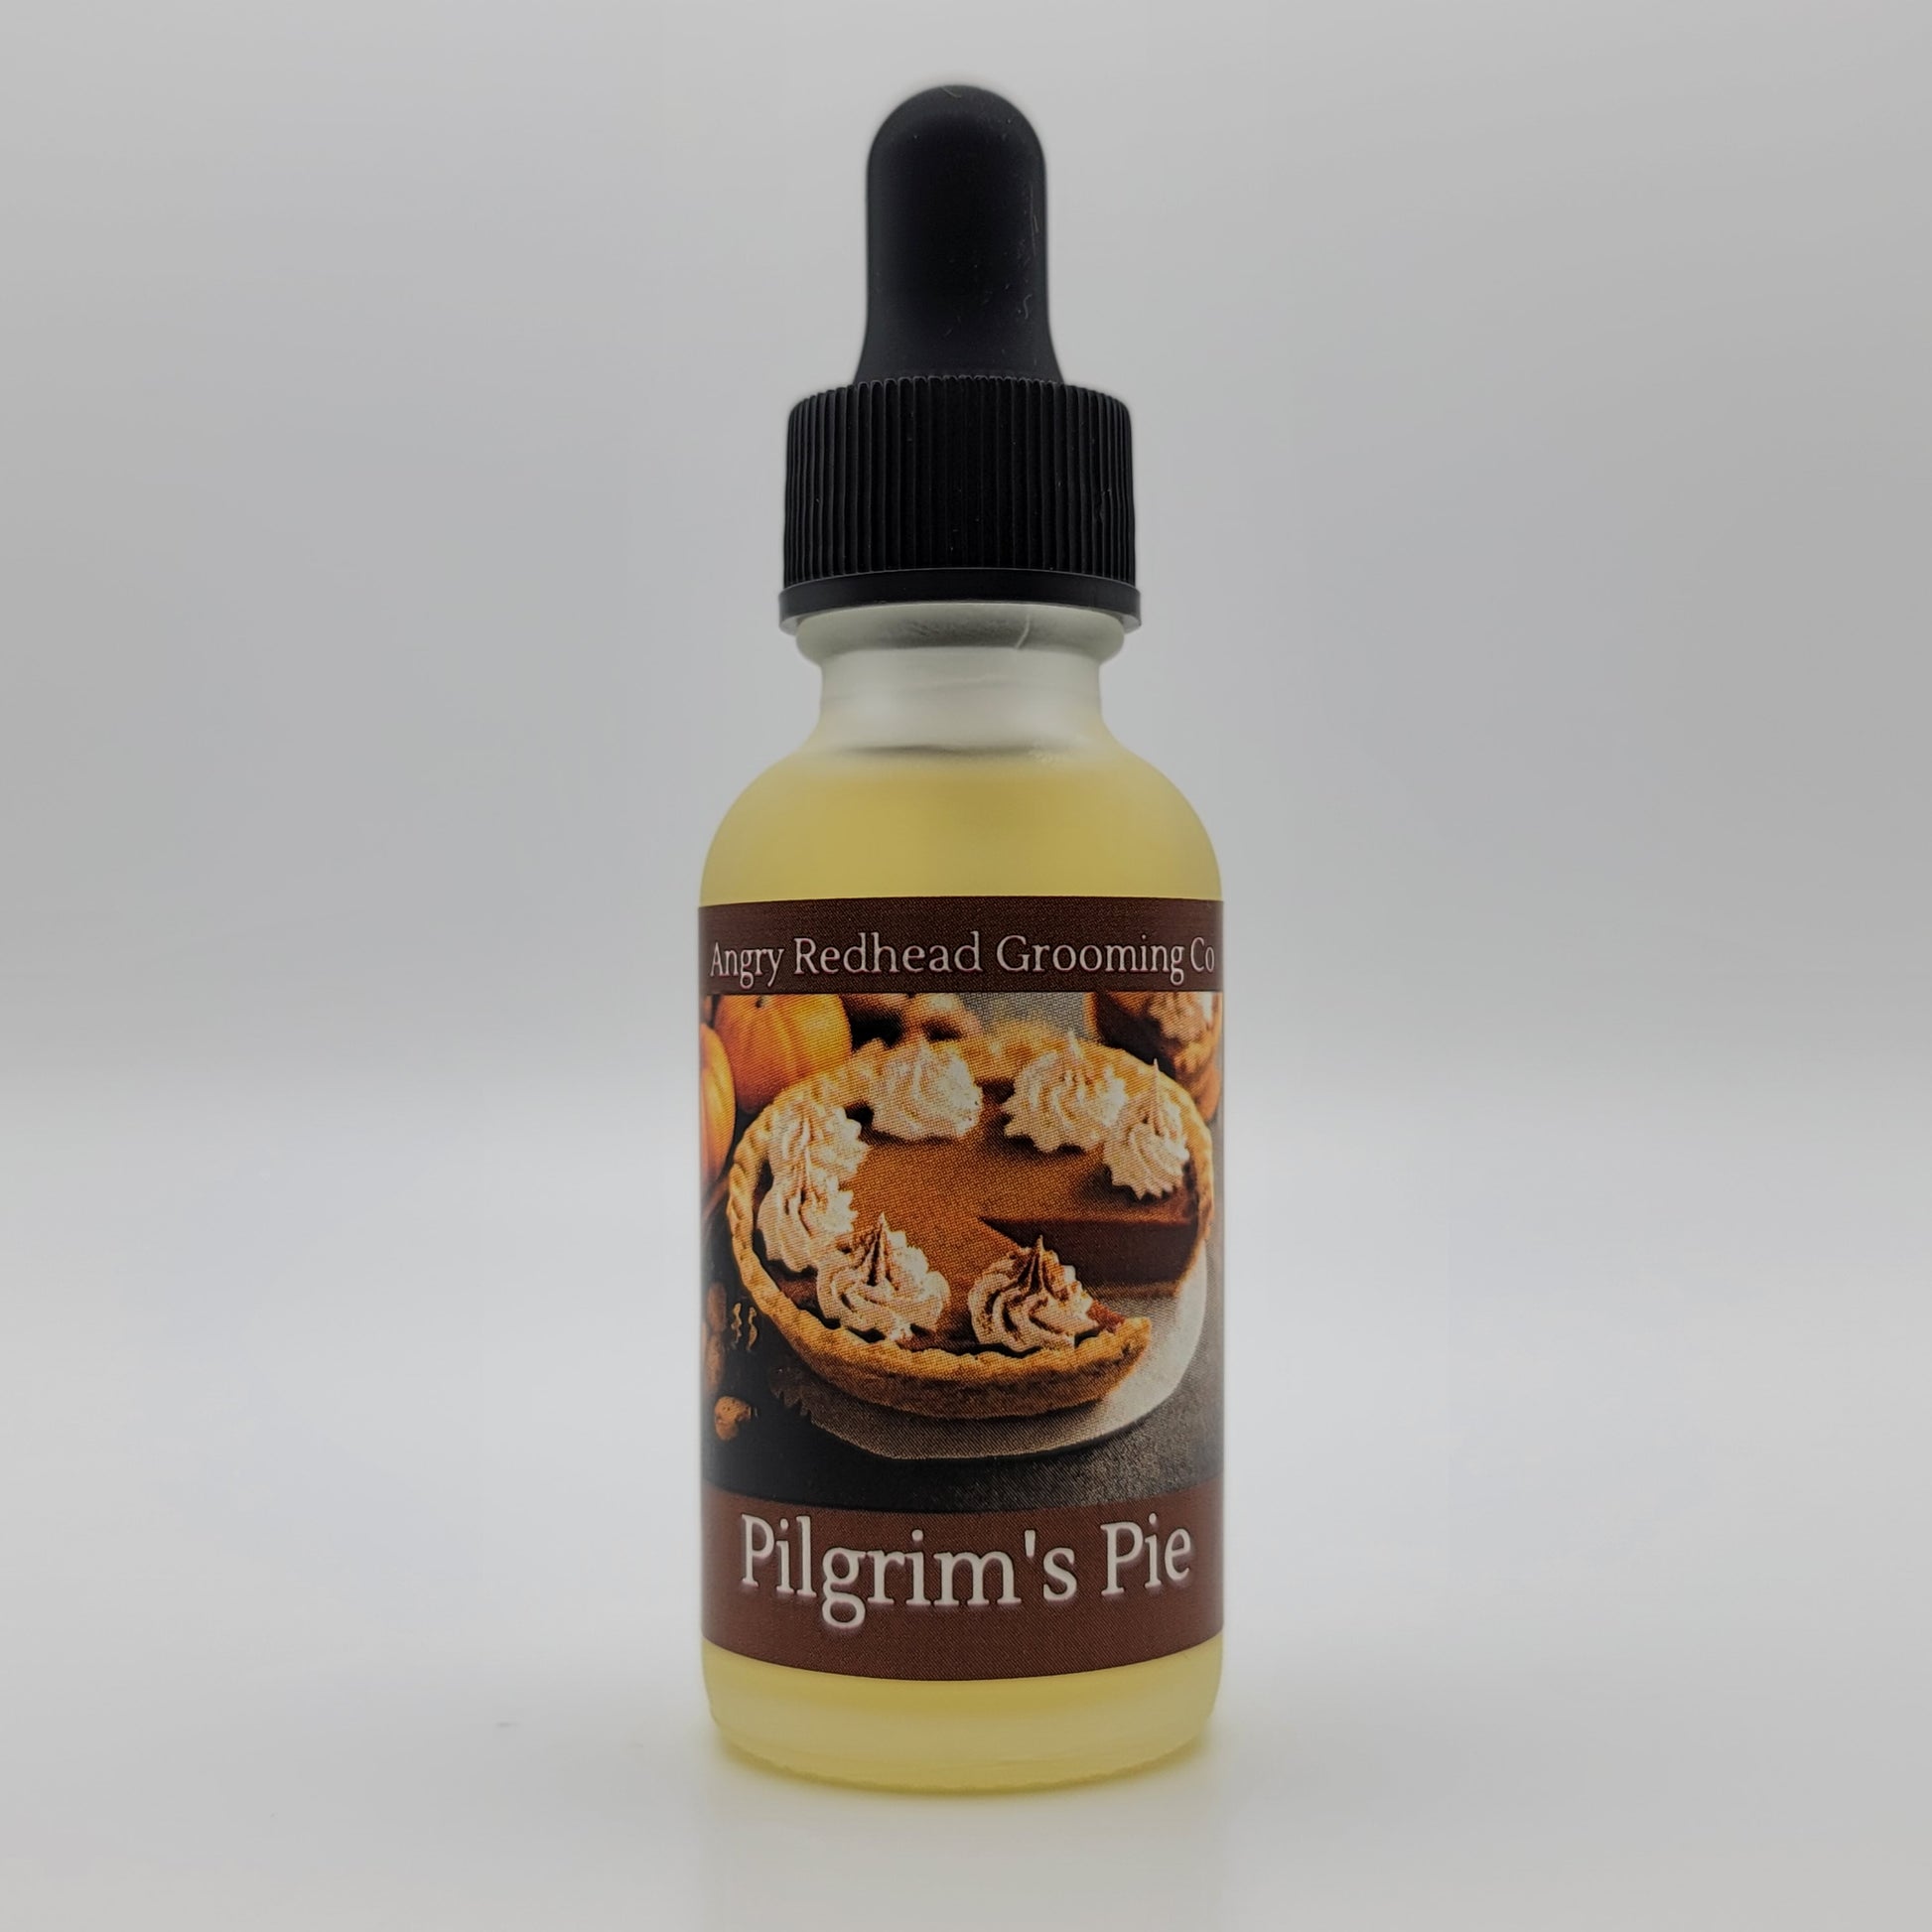 Pilgrim's Pie Pre-Shave Oil by Angry Redhead Grooming Co - angryredheadgrooming.com